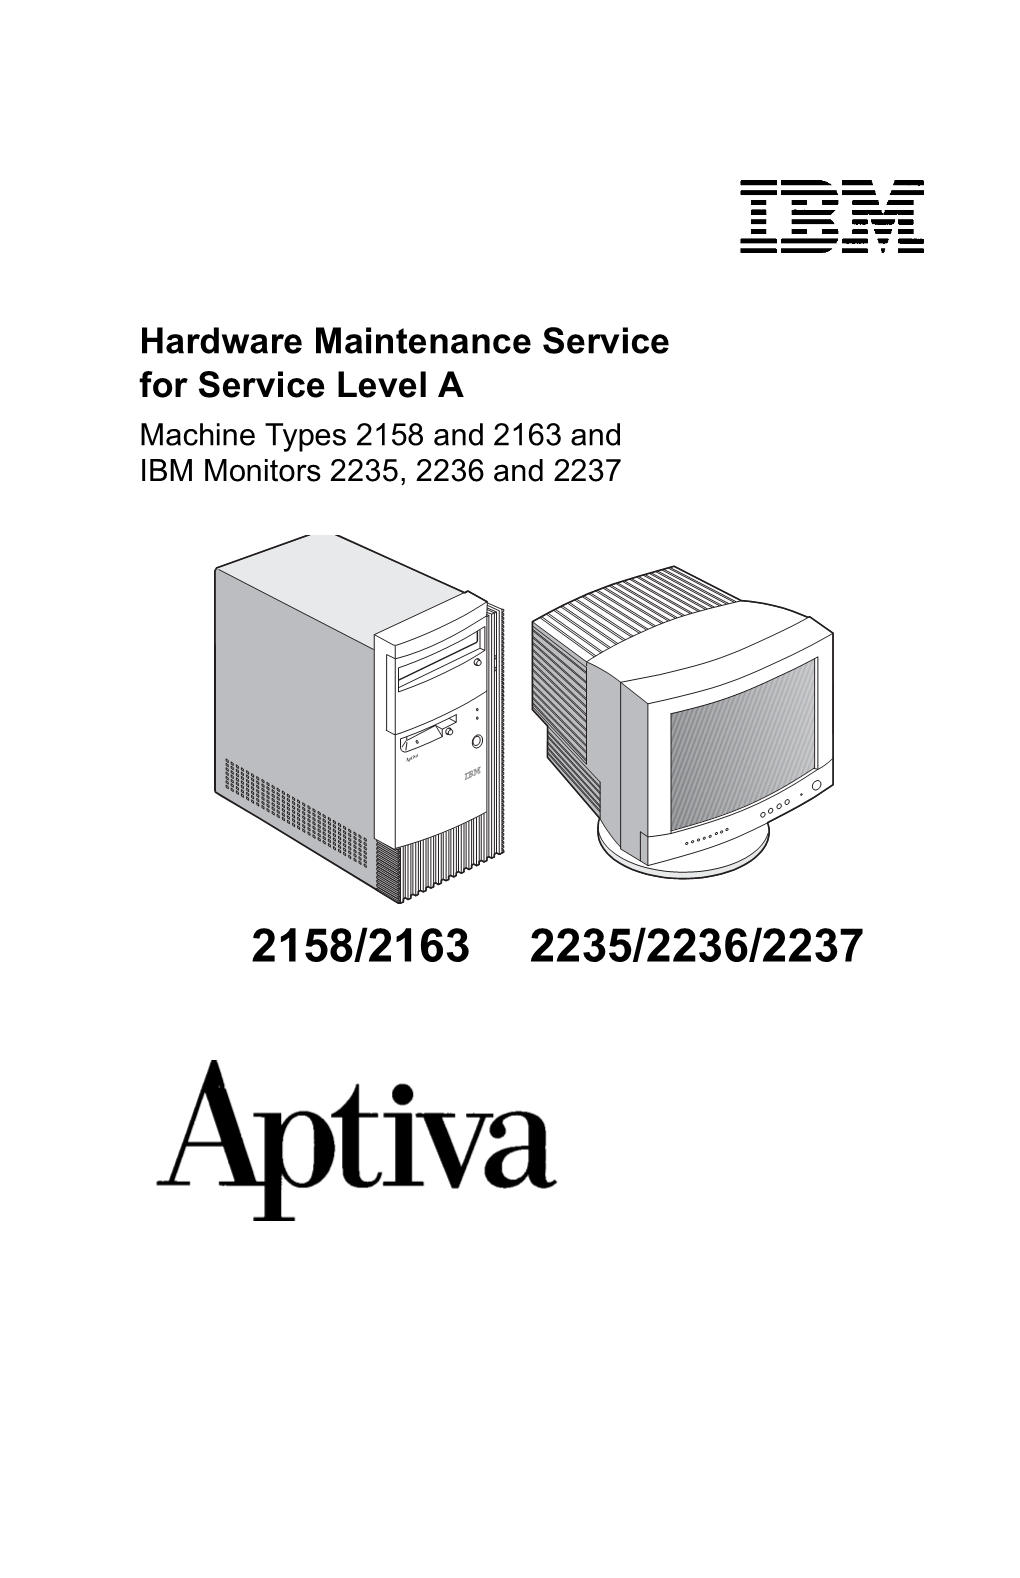 Hardware Maintenance Service for Service Level a Machine Types 2158 and 2163 and IBM Monitors 2235, 2236 and 2237